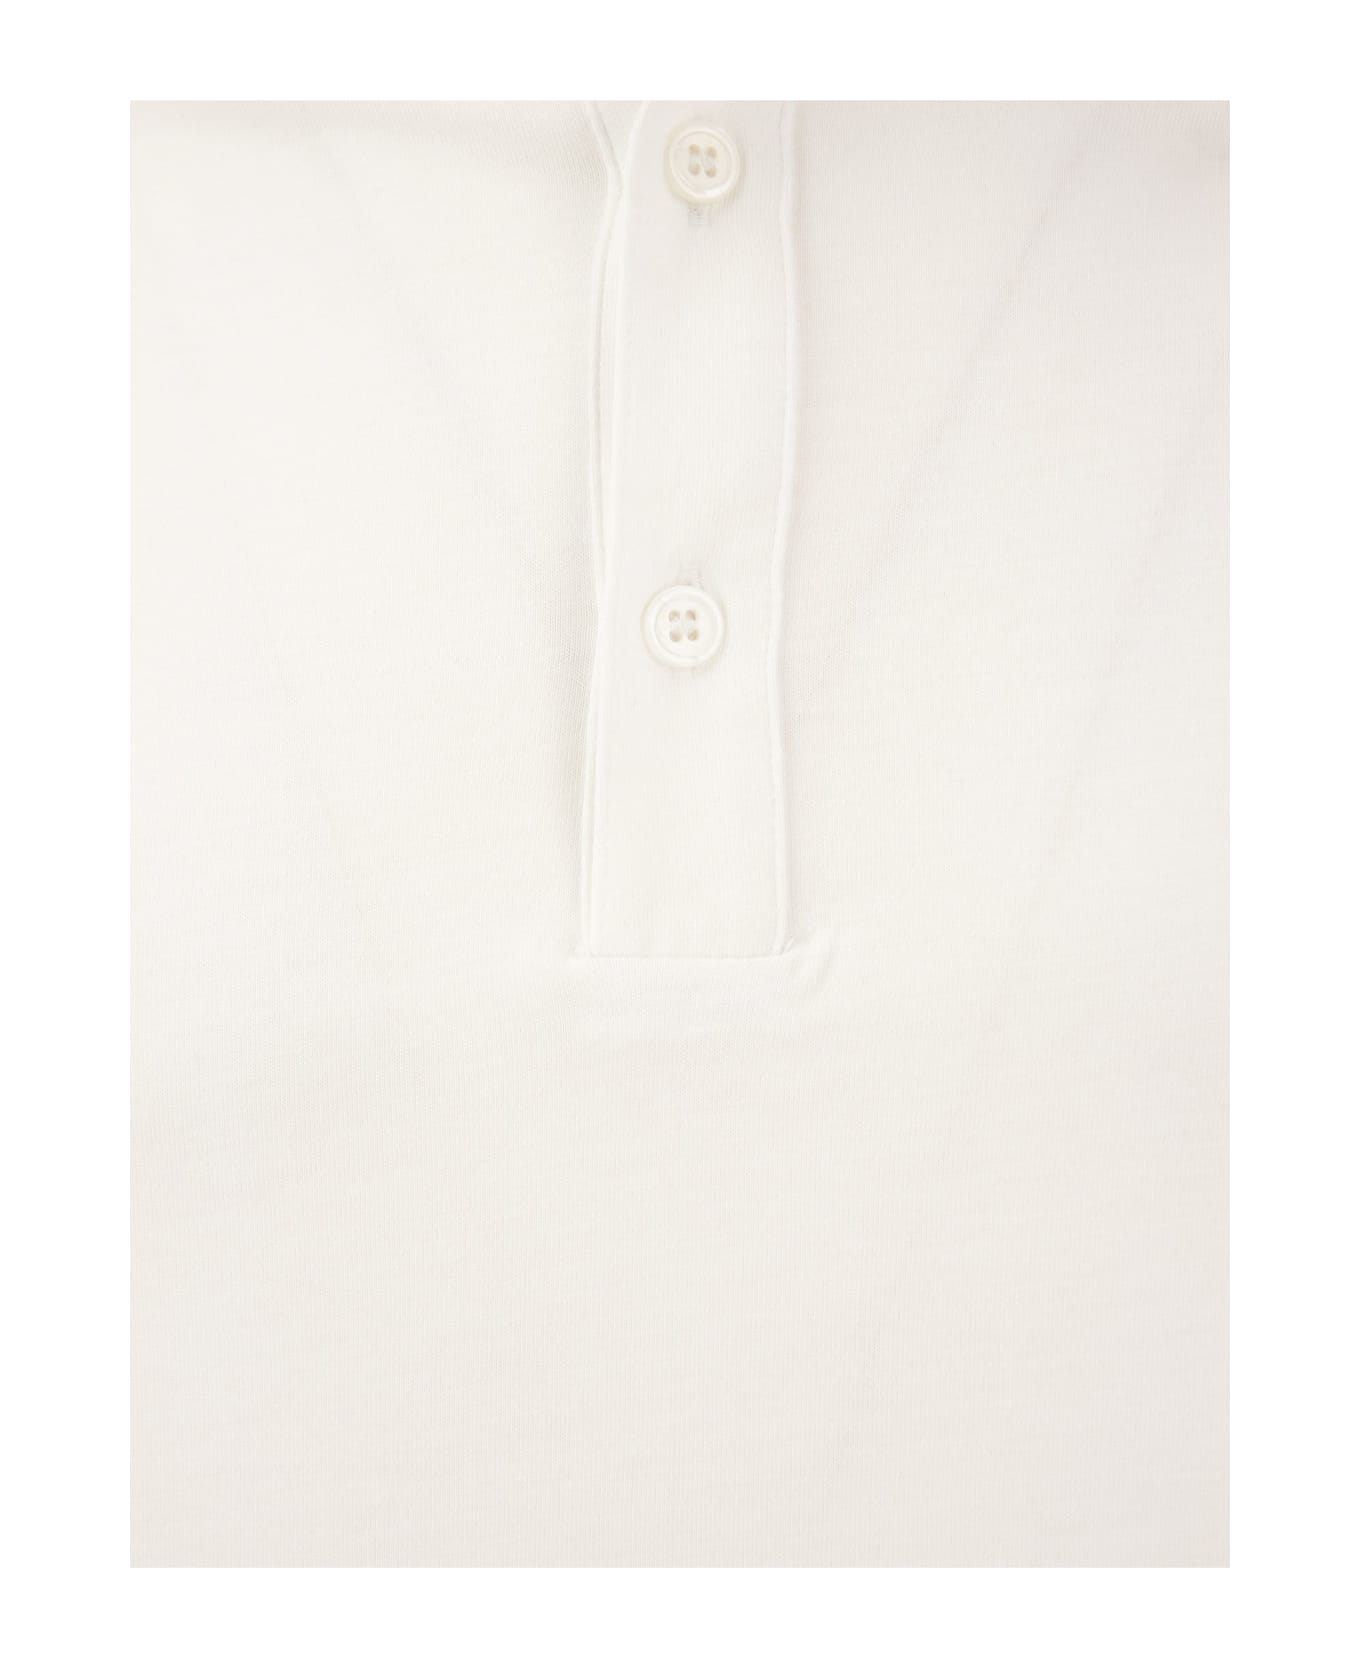 Majestic Filatures Short-sleeved Polo Shirt In Lyocell And Cotton - White ポロシャツ